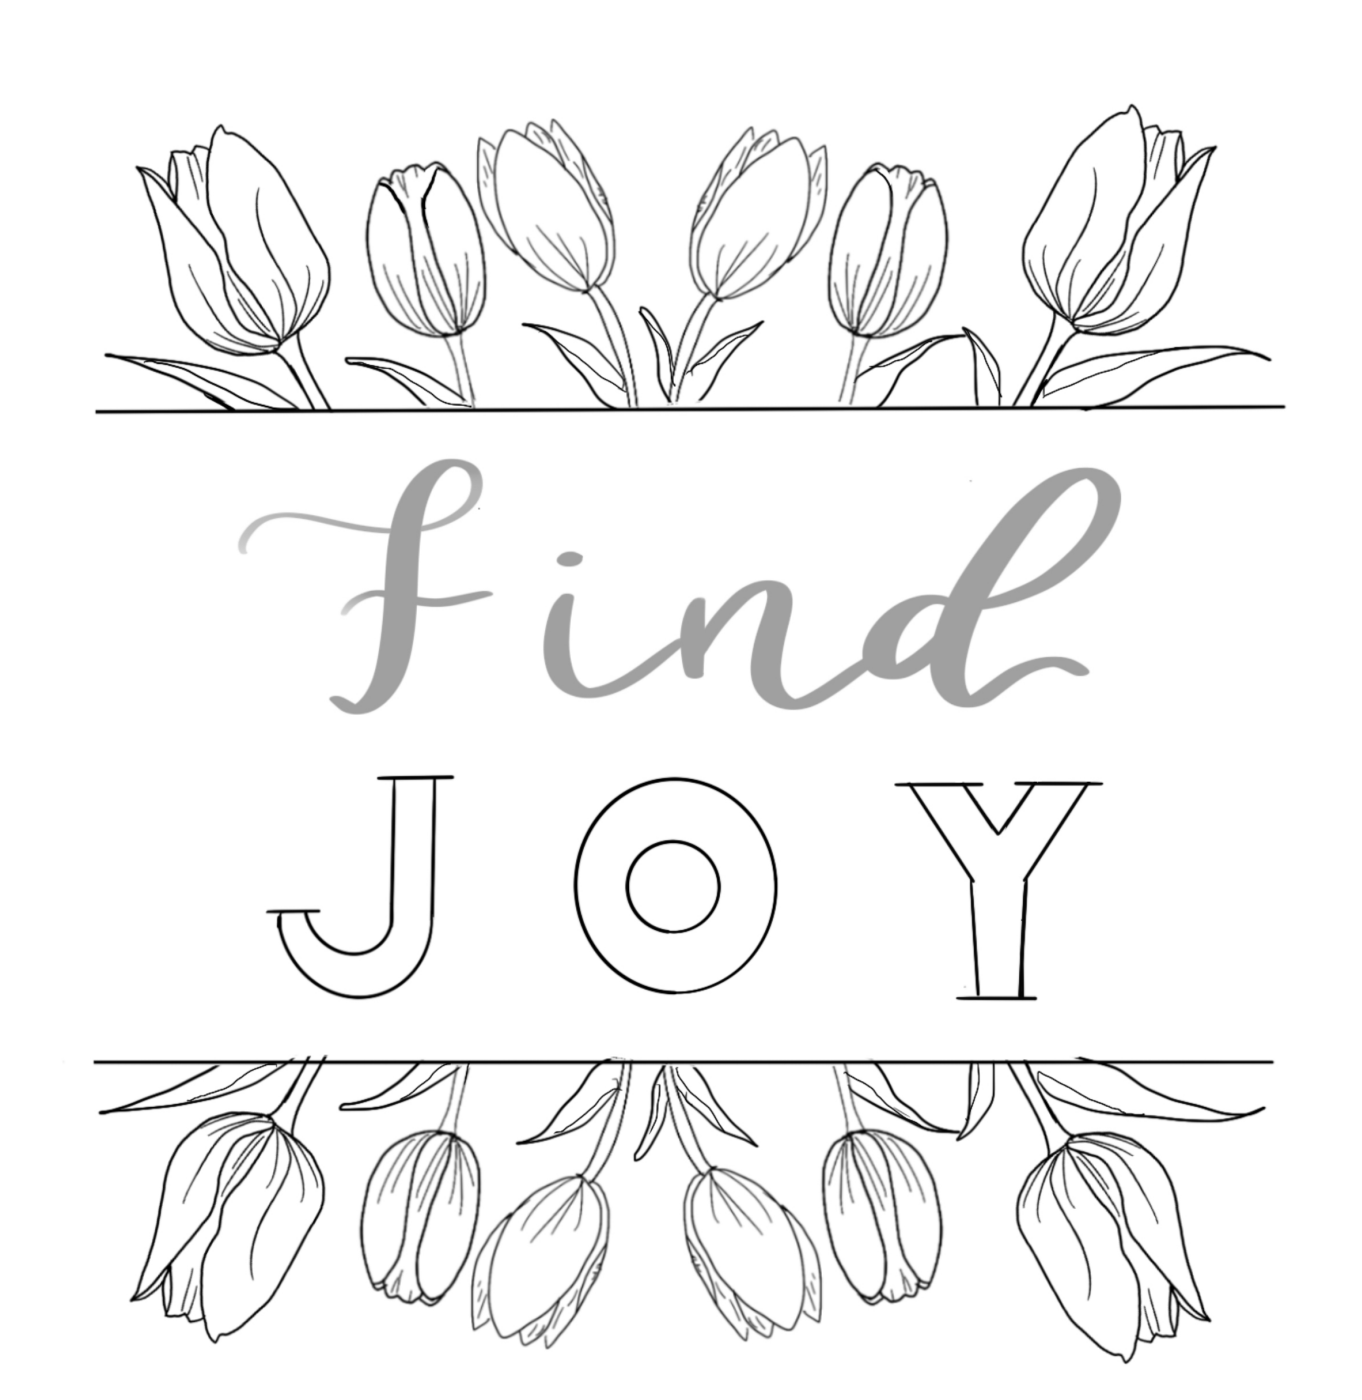 Find Joy - Free Coloring Page